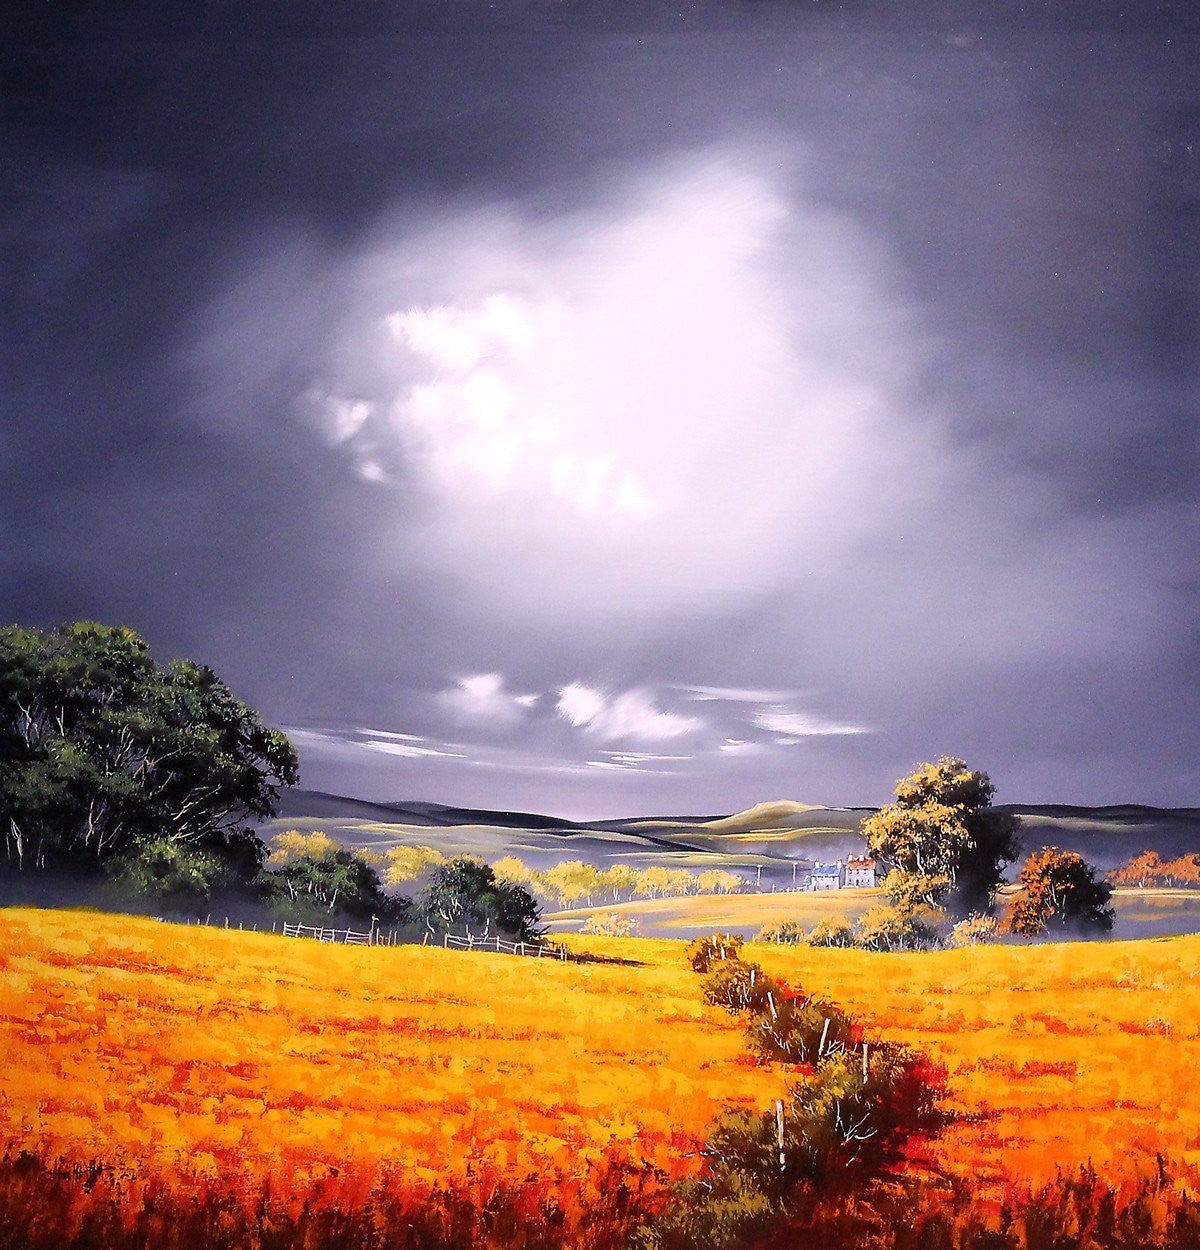 Over the Fields - SOLD Allan Morgan